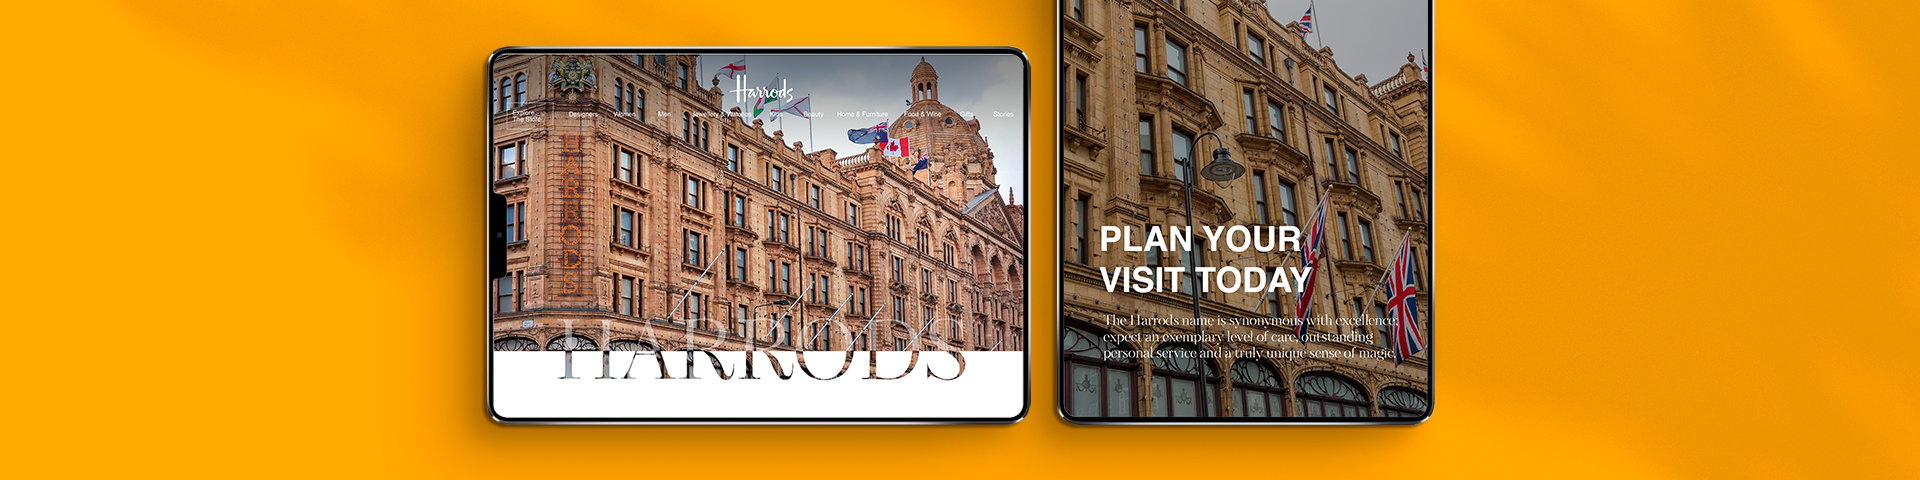 Harrods adopts new holistic 360-degree view of the customer to increase engagement, retention, and spend.